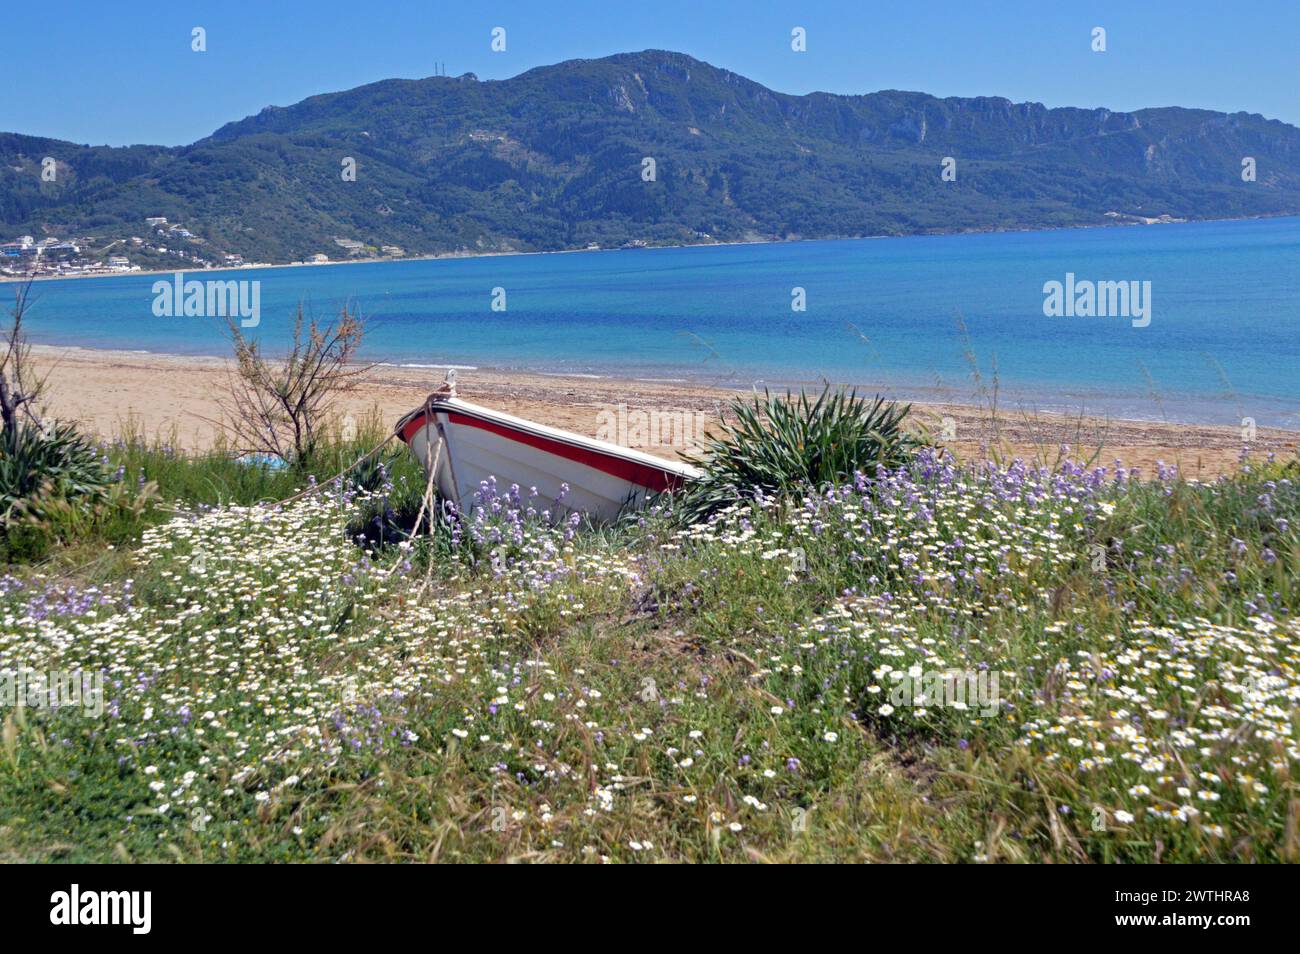 Greece, Island of Corfu, Agios Georgios: the beach of Agios Georgios, over 1000 metres long, with a beached boat in the foreground and flowers of Thre Stock Photo